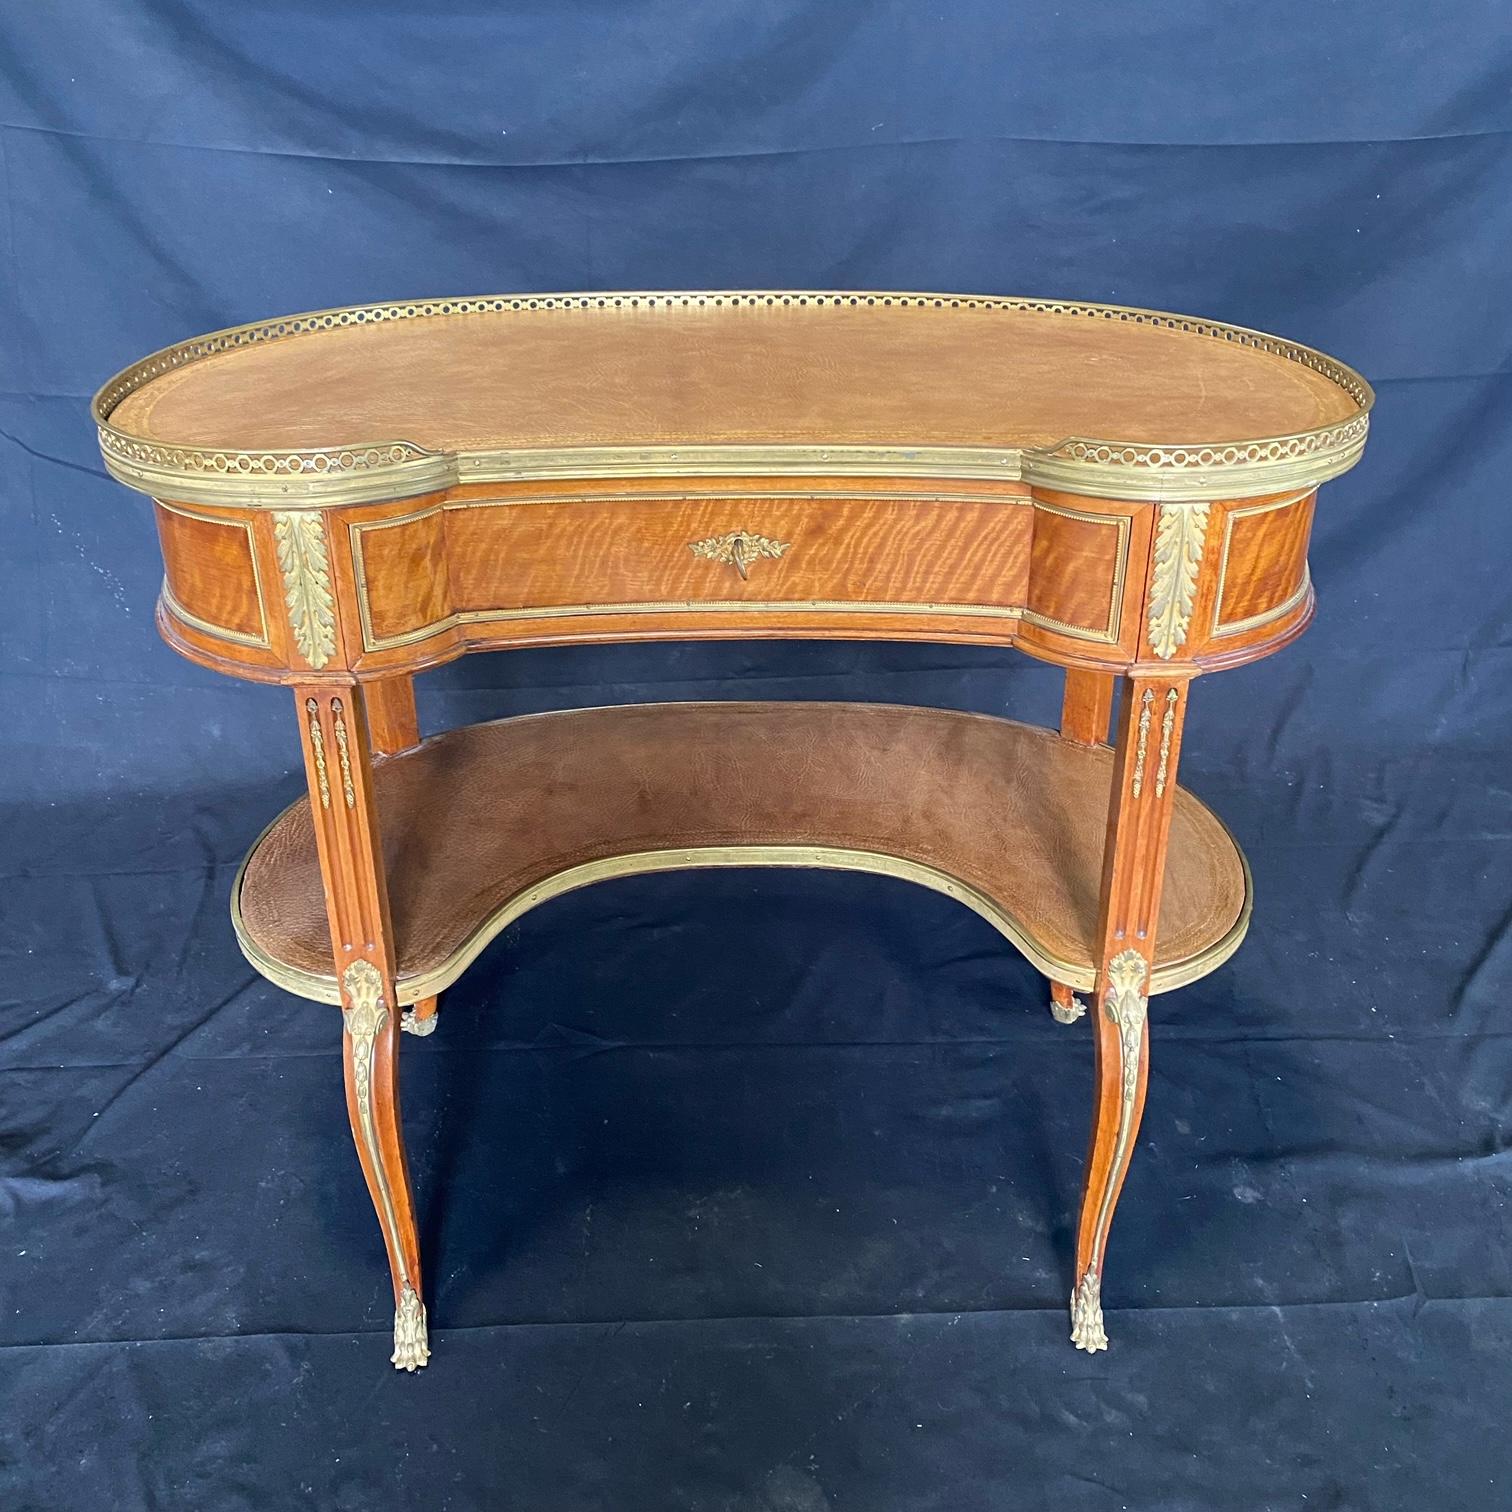 A very fine French Louis XV style 19th C kidney shaped desk with original tooled leather surface, elegantly mounted in fine gilt bronze and on cabriole legs. Faint circle mark on surface (see photos)

#5173.